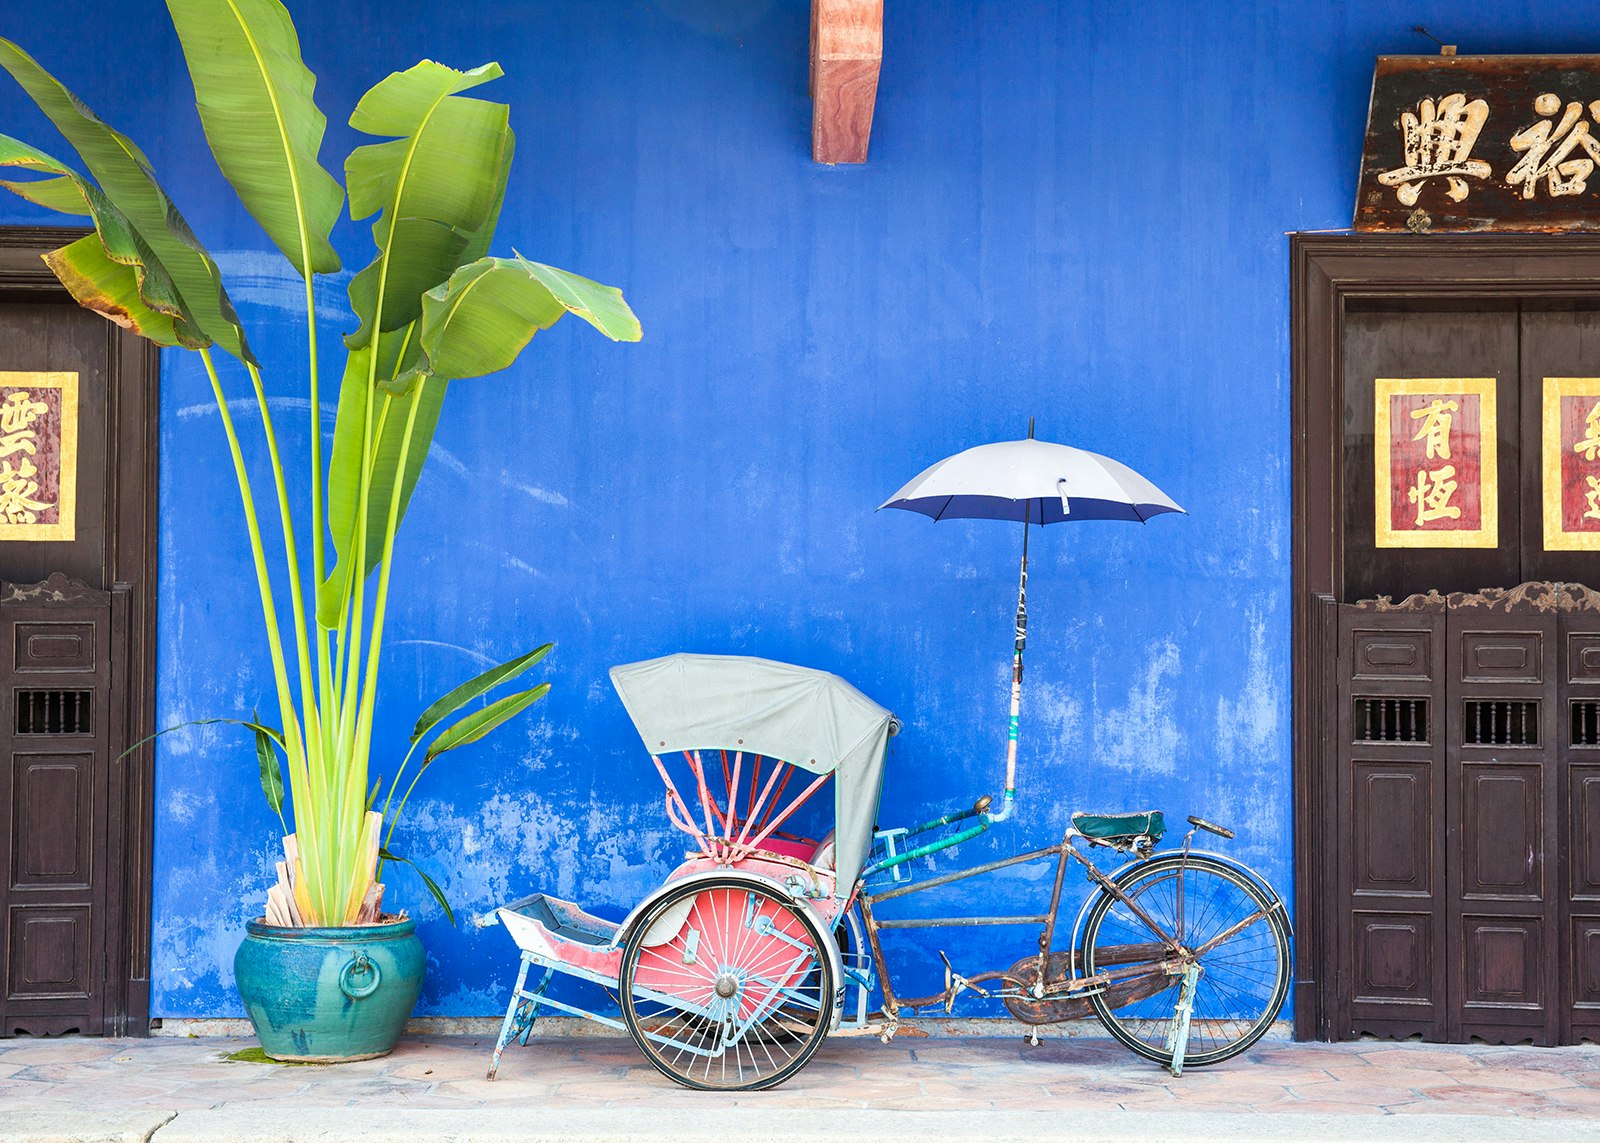 Old rickshaw tricycle near Fatt Tze Mansion or Blue Mansion, a famous oriental historical building in Georgetown, Malaysia © Elena Ermakova / Shutterstock